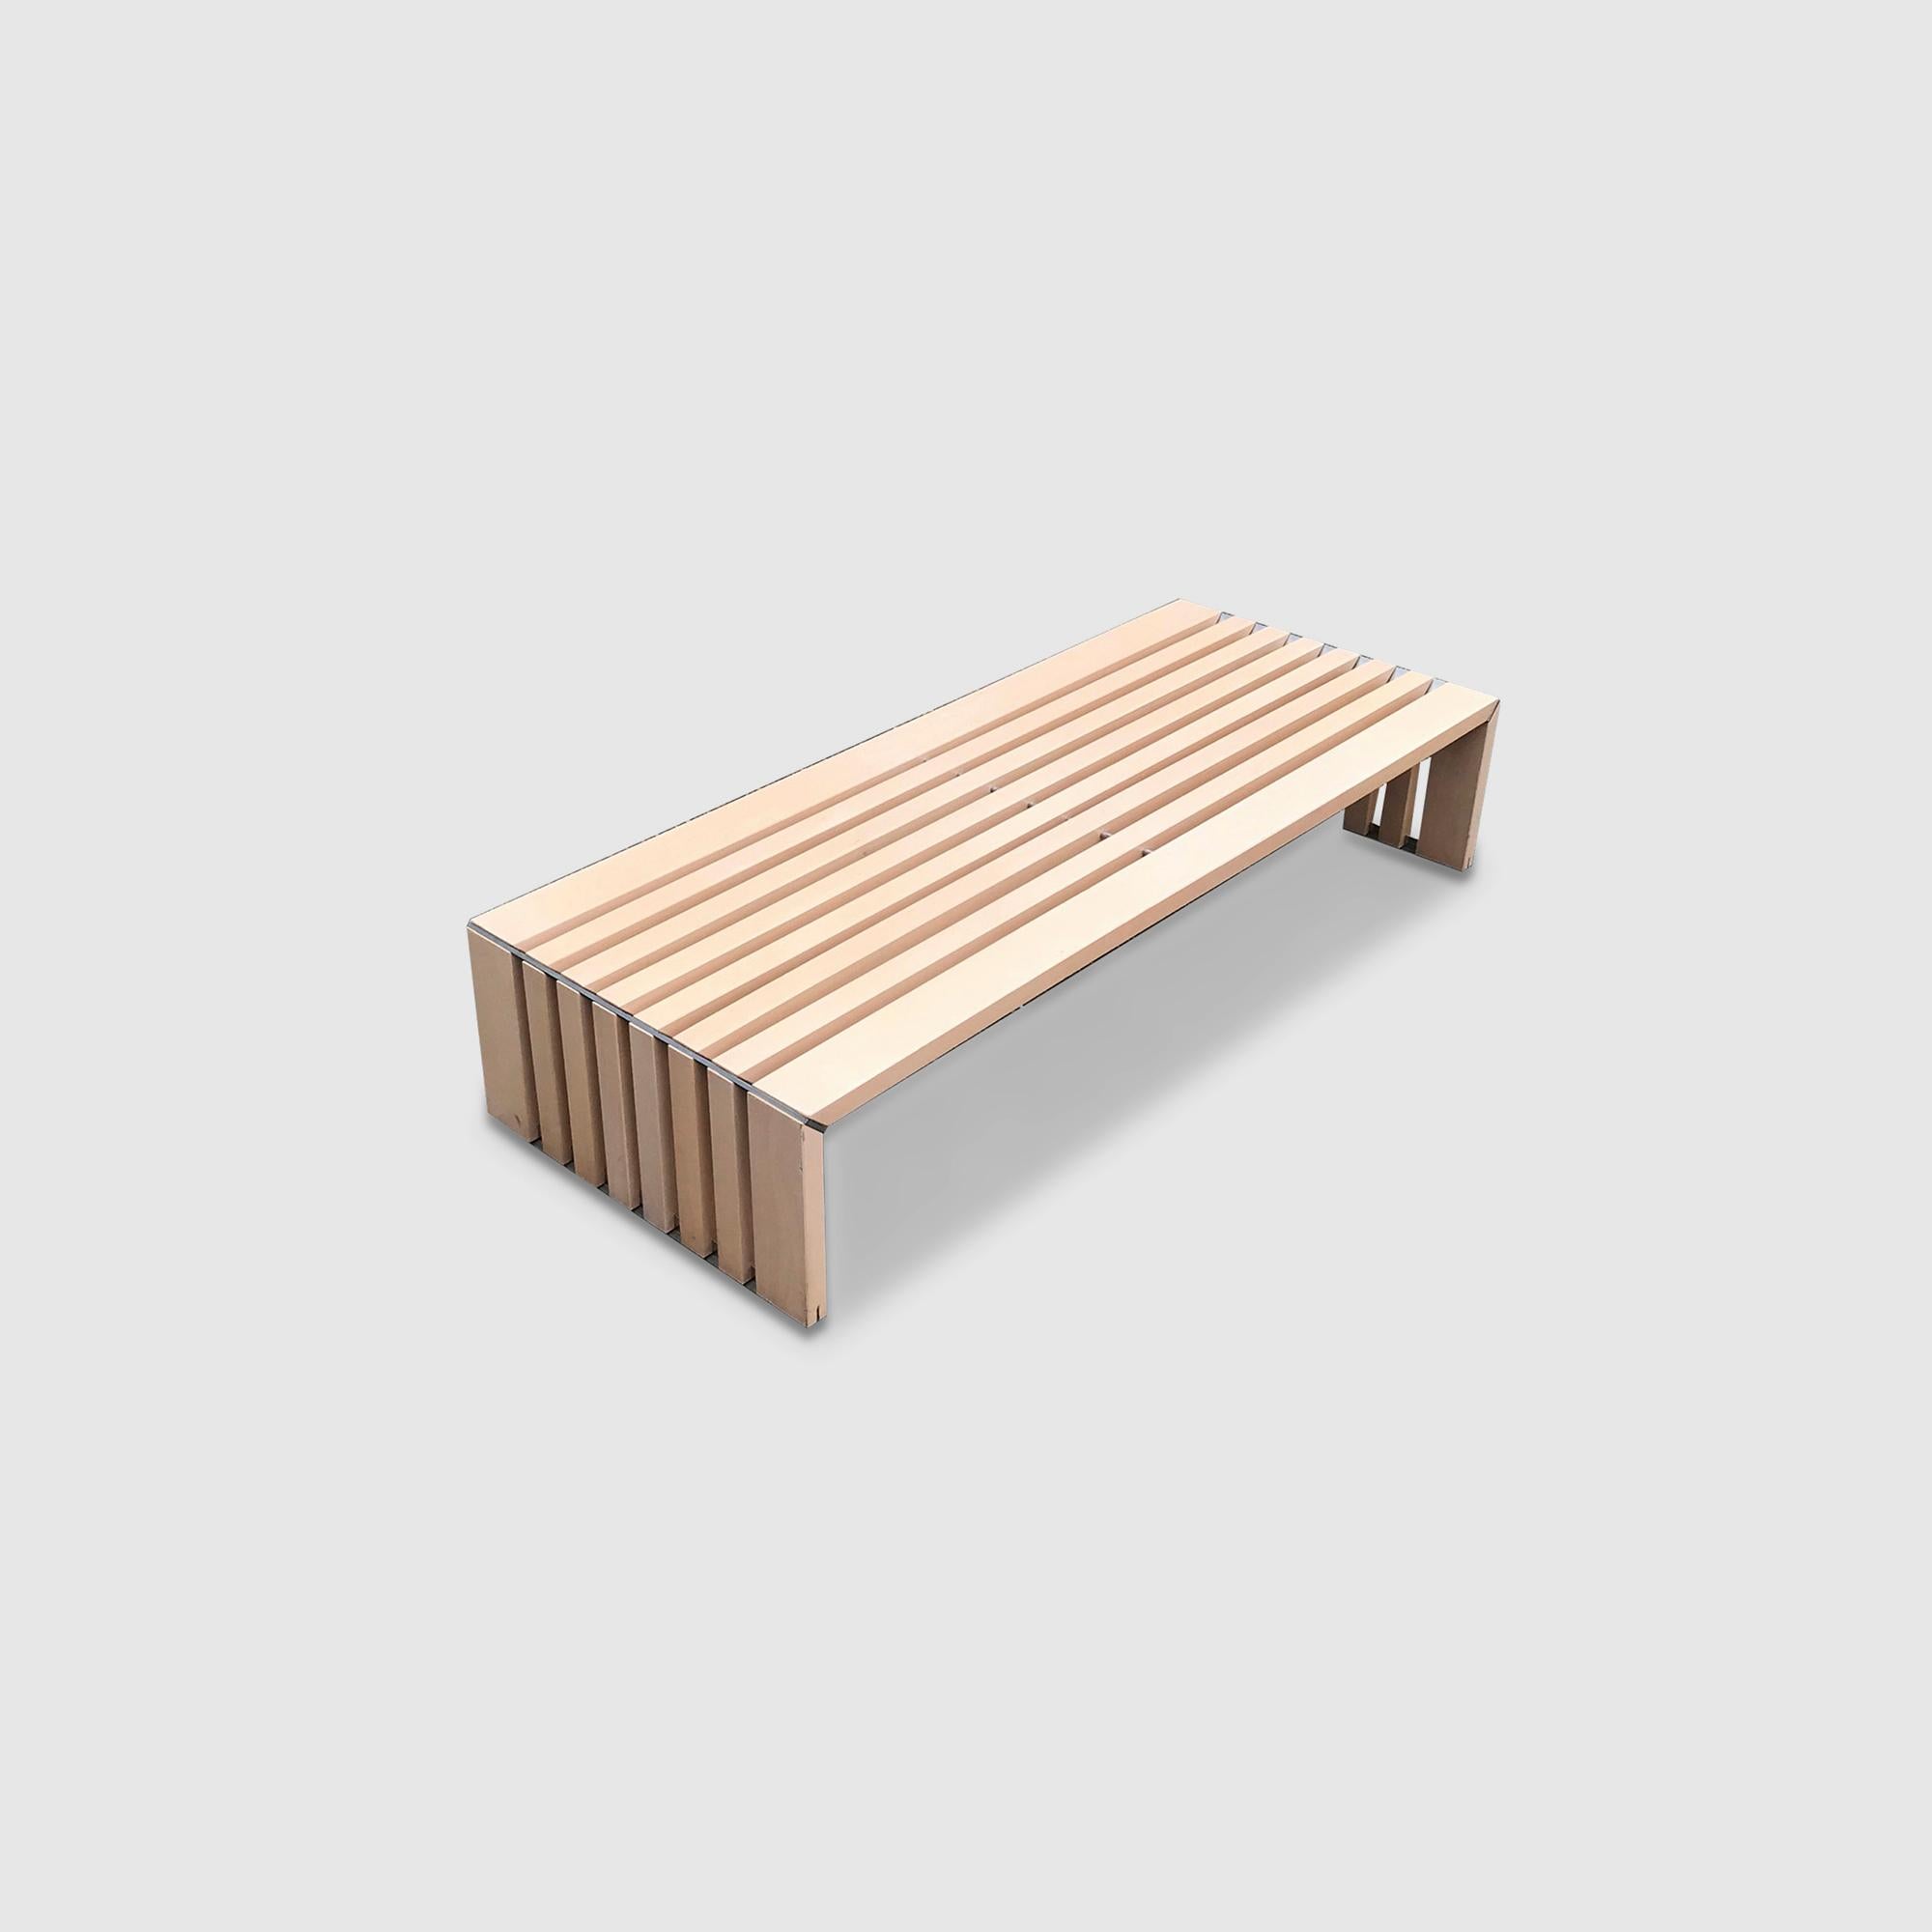 Ash Passe Partout slatted ash bench by Walter Antonis for Arspect 1970s For Sale